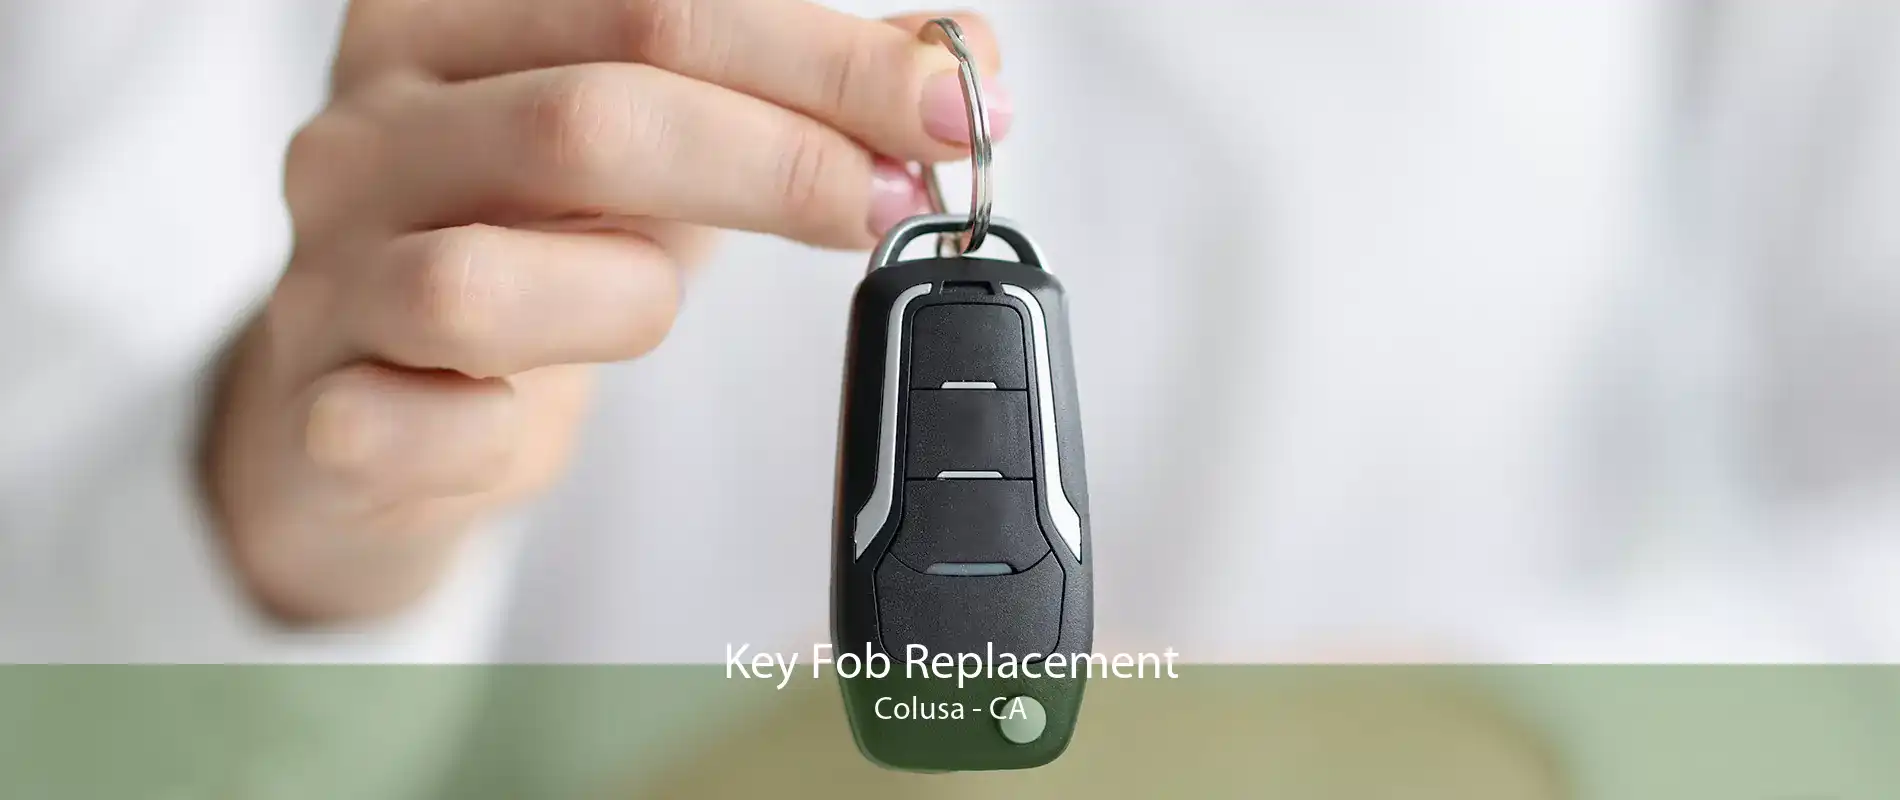 Key Fob Replacement Colusa - CA